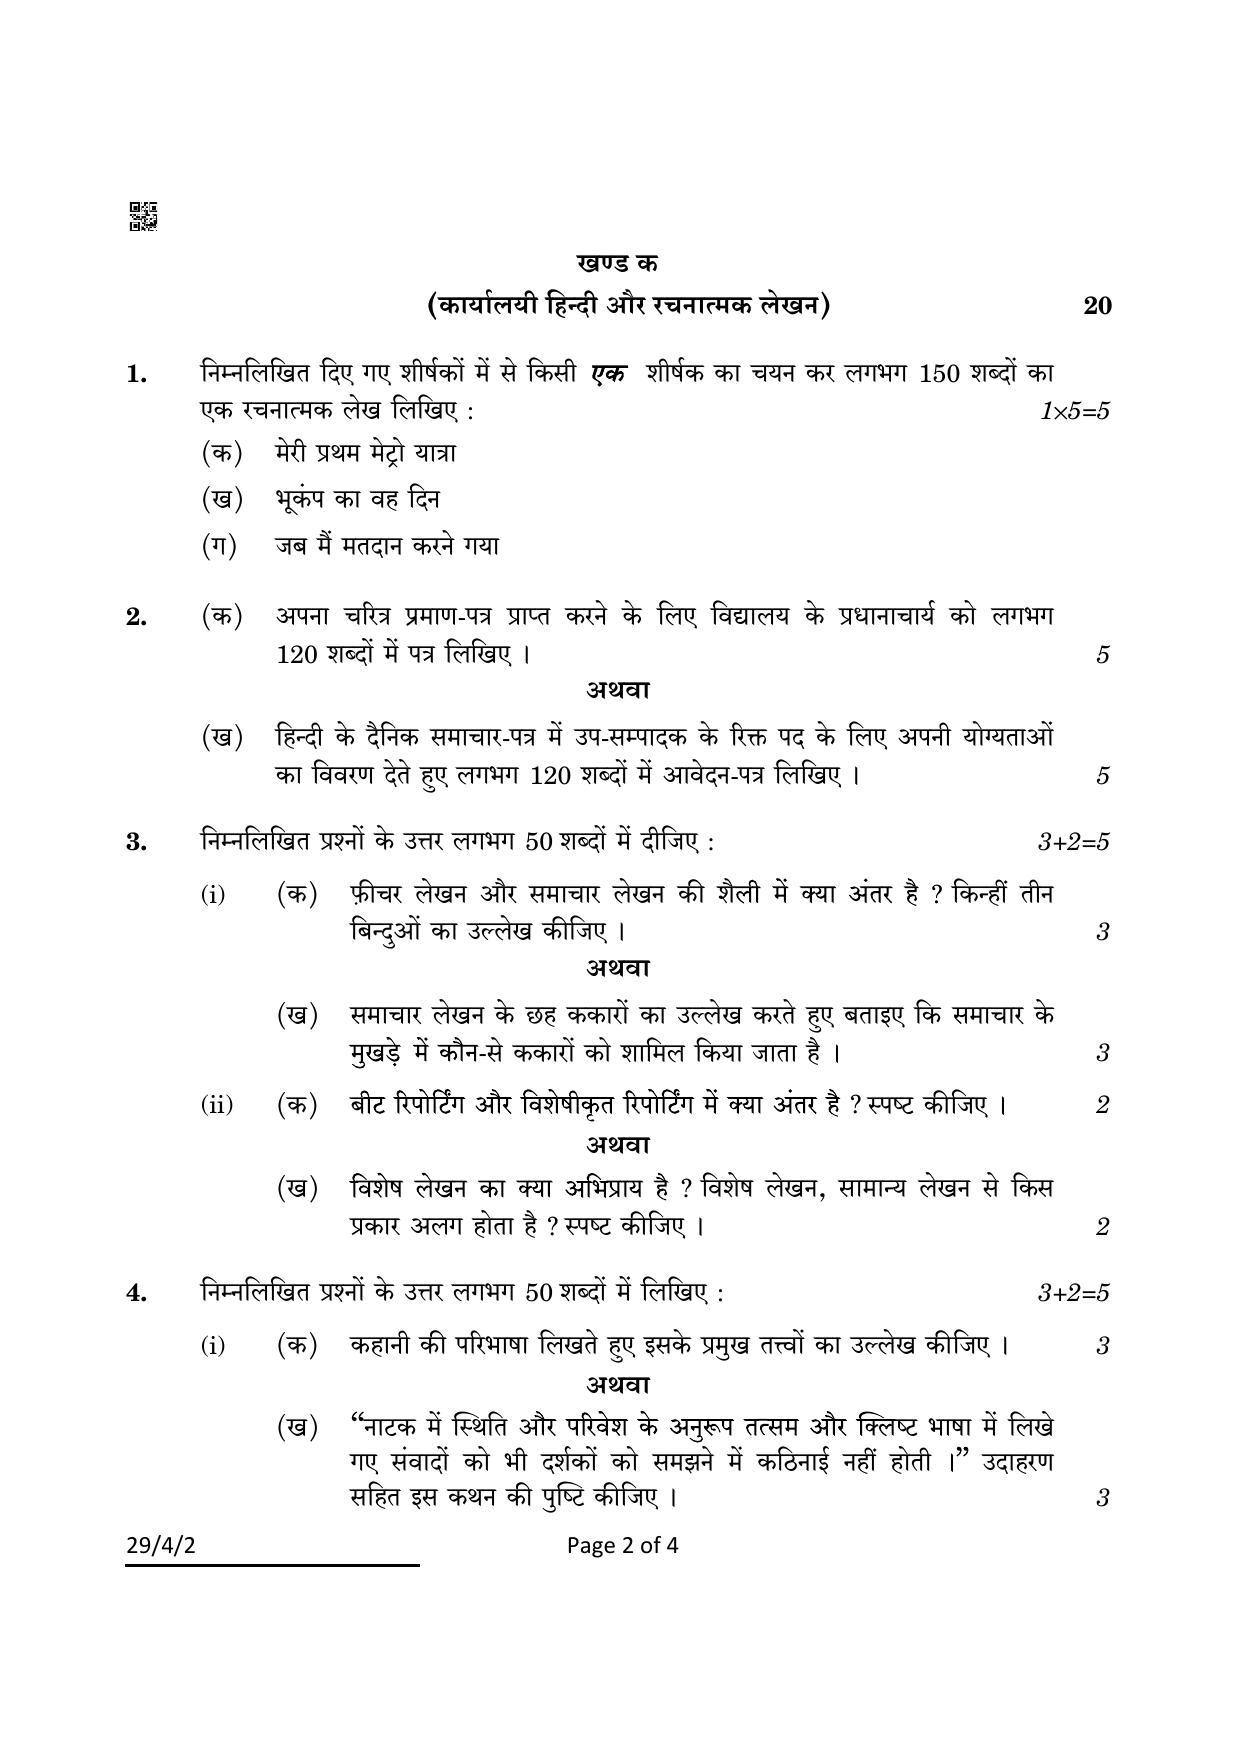 CBSE Class 12 29-4-2 Hindi Elective 2022 Question Paper - Page 2